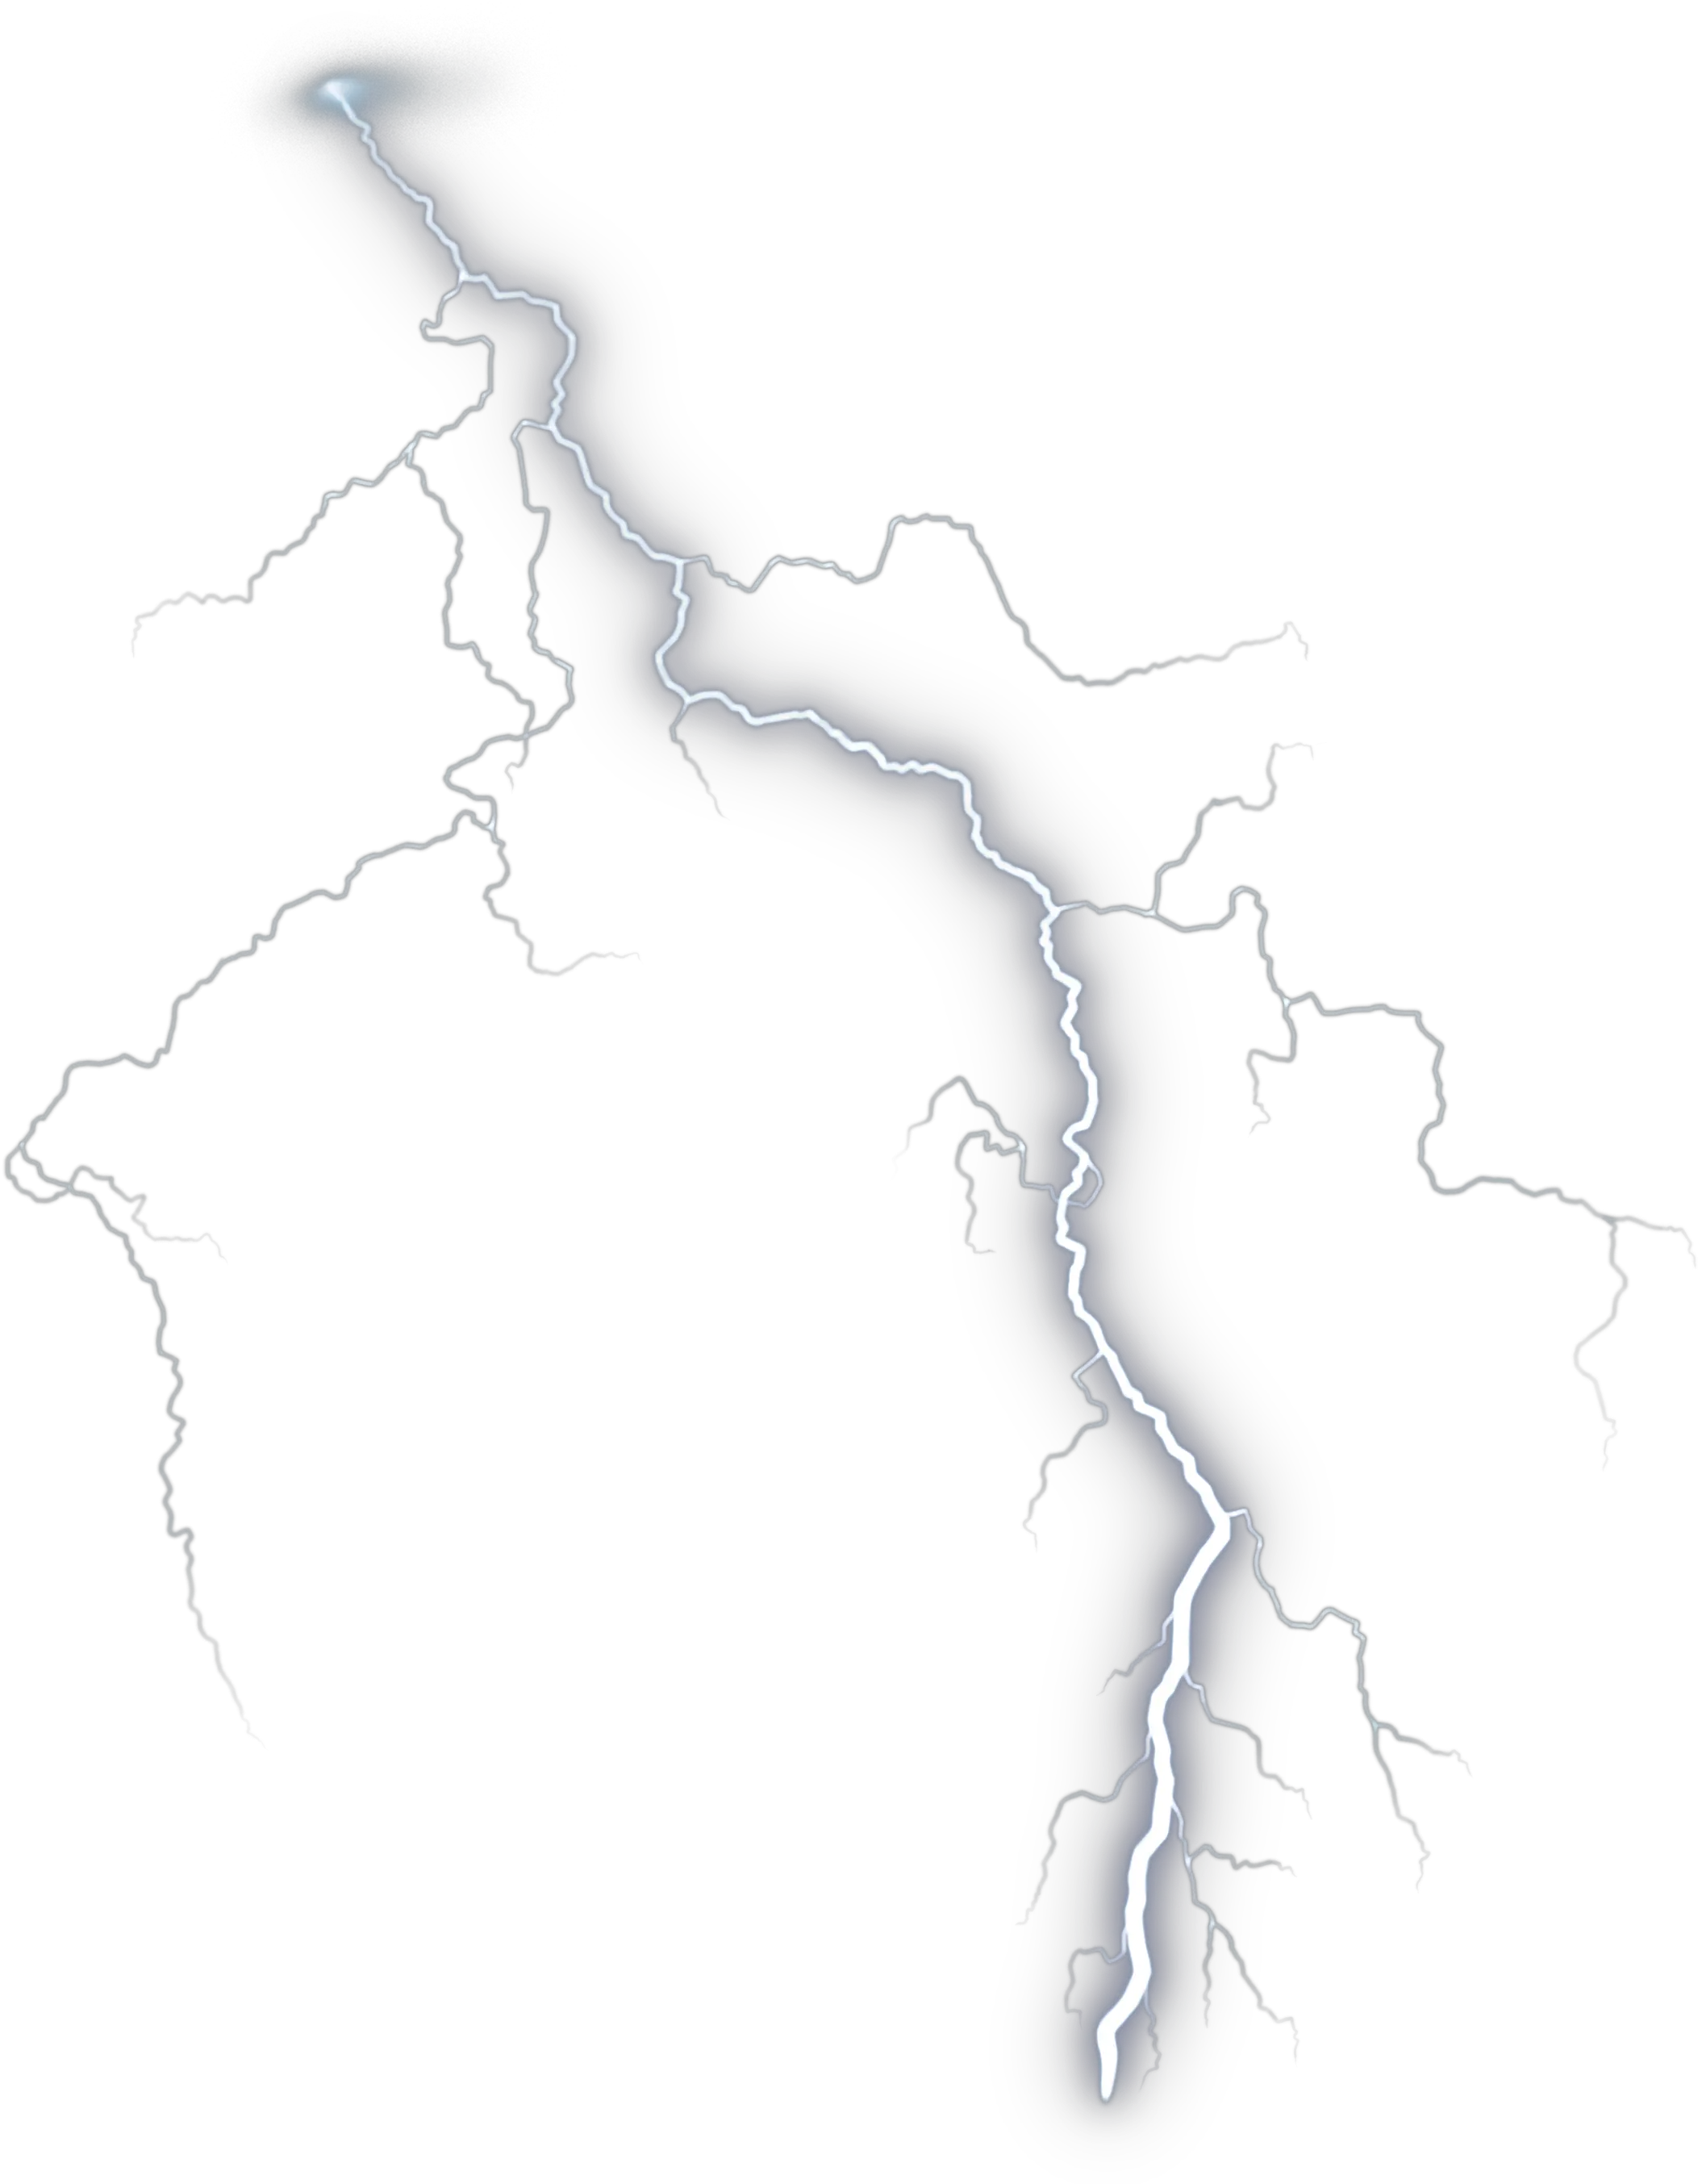 52 Lightning Png Images Are Free To Lightening